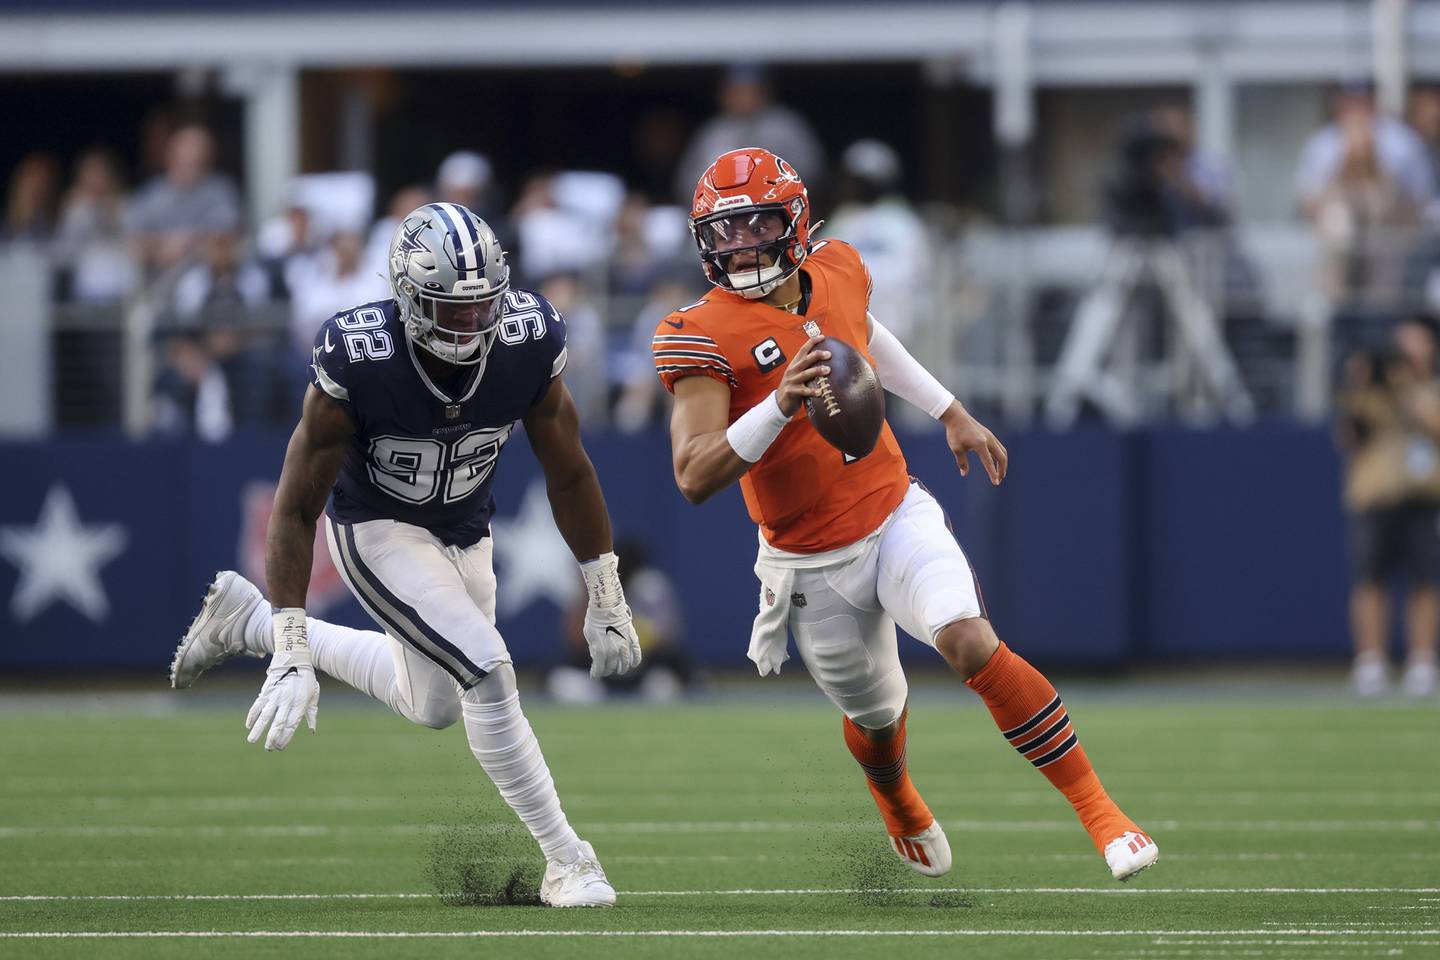 Cowboys defensive end Dorance Armstrong chases Bears quarterback Justin Fields while he runs the ball during the first quarter at AT&T Stadium on Oct. 30, 2022.